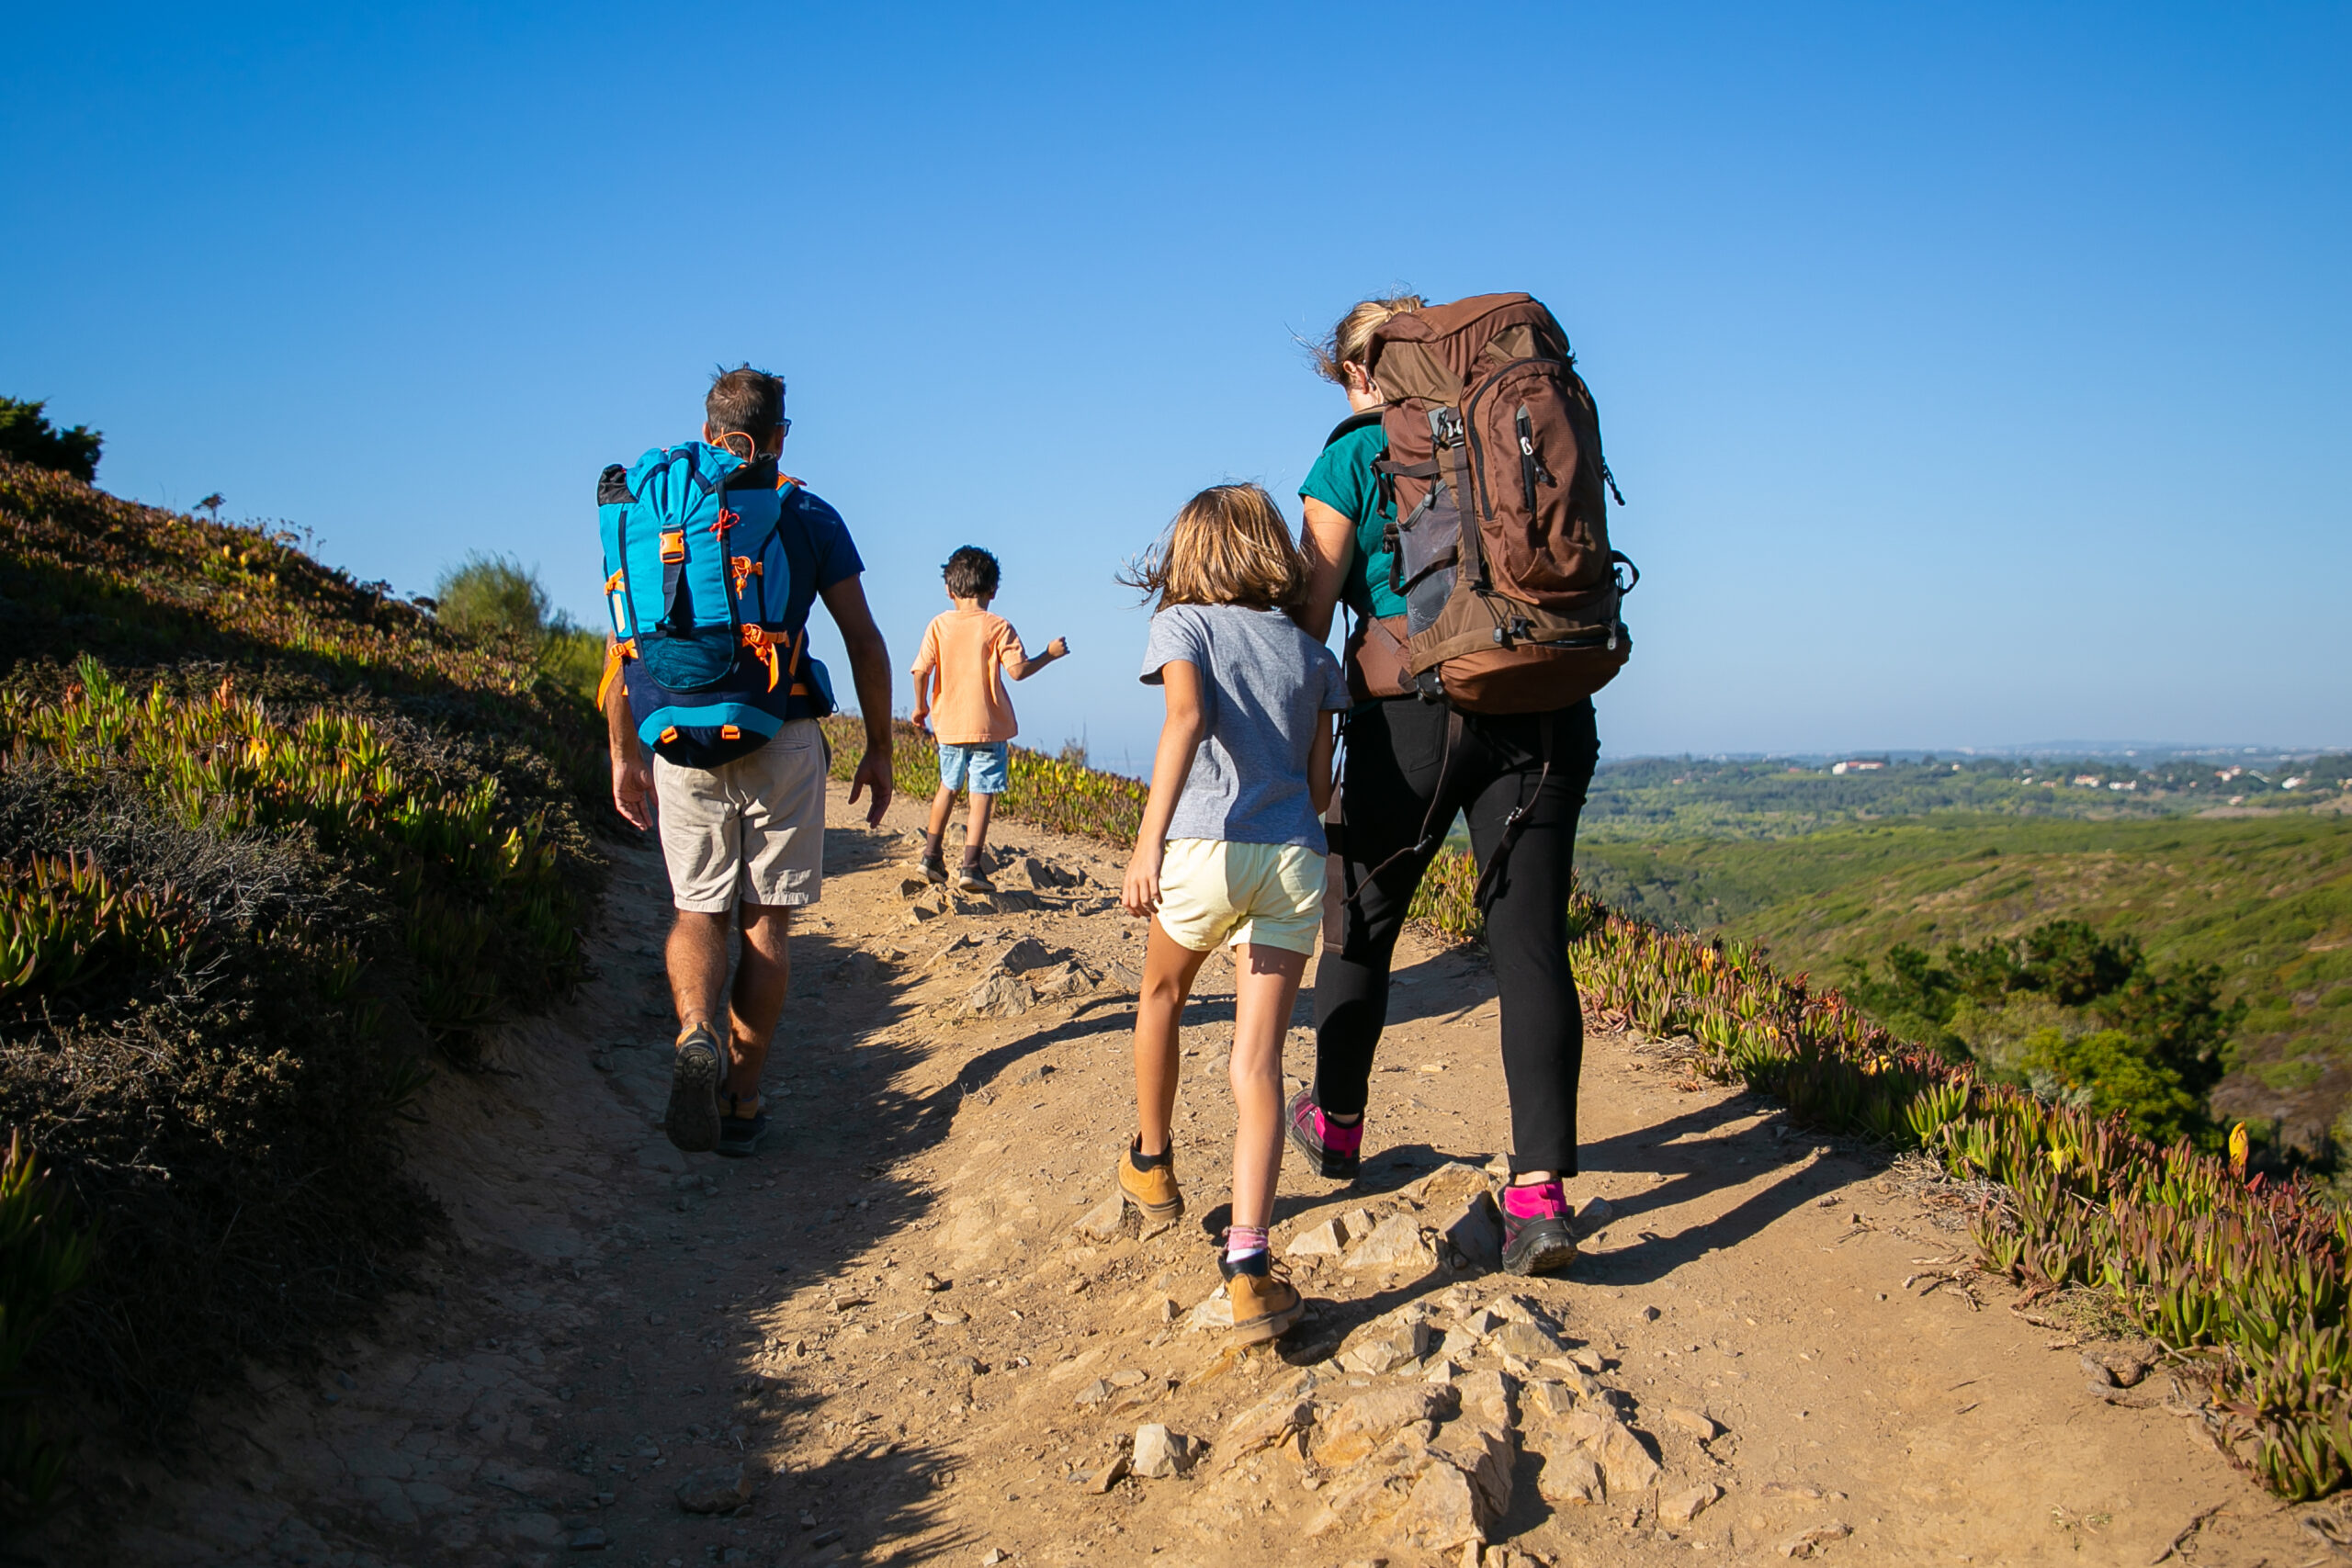 Family of travelers with backpacks walking on track. Parents and two kids hiking outdoors. Back view. Active lifestyle or adventure tourism concept